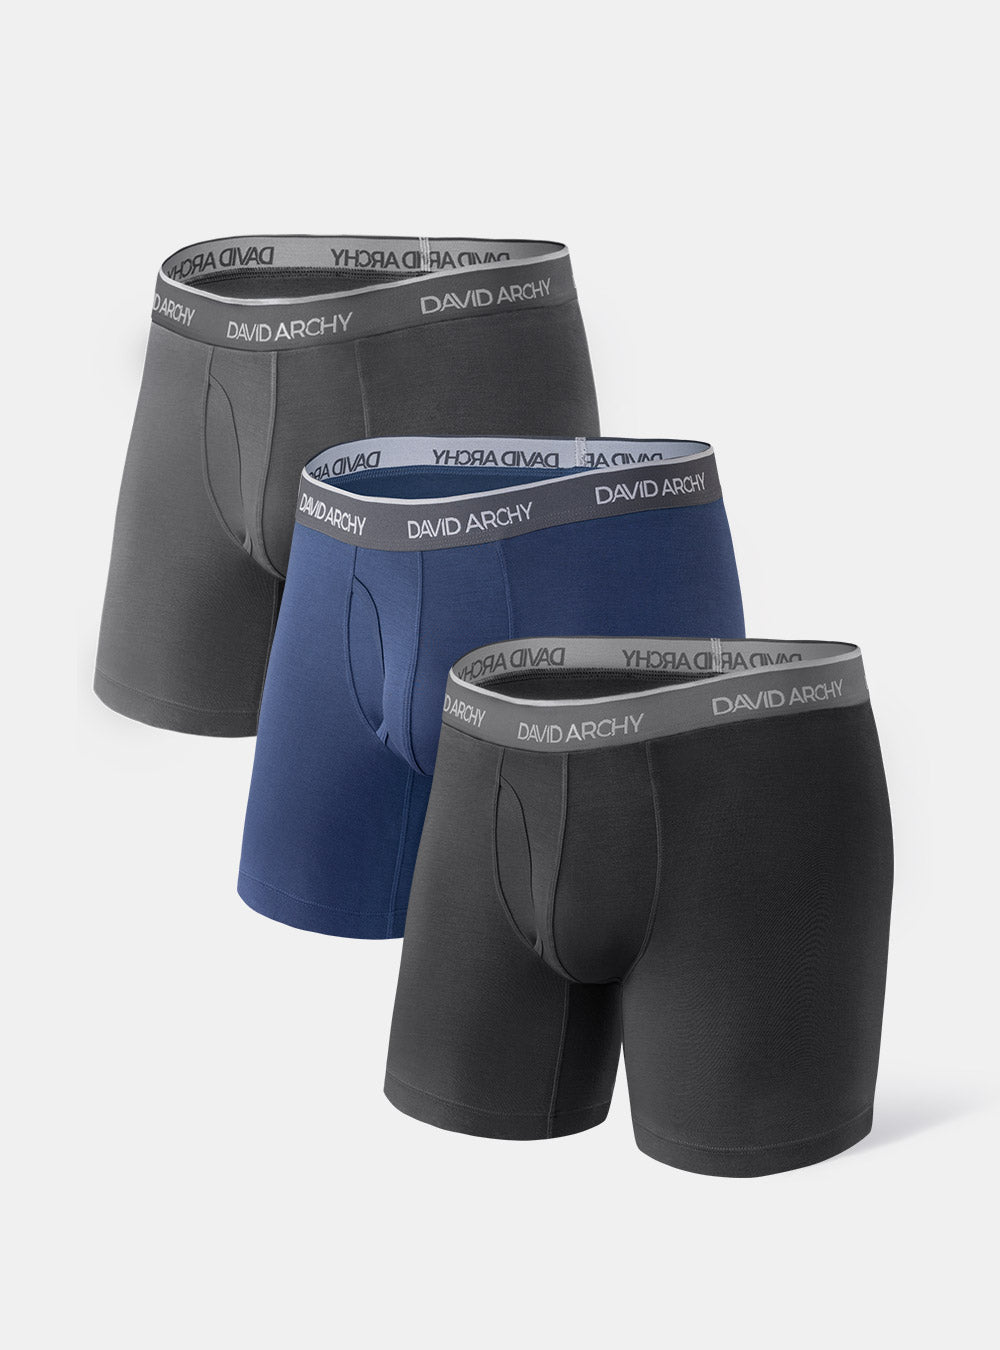 3 Packs MicroModal Briefs with Pouch David Archy Men's Underwear